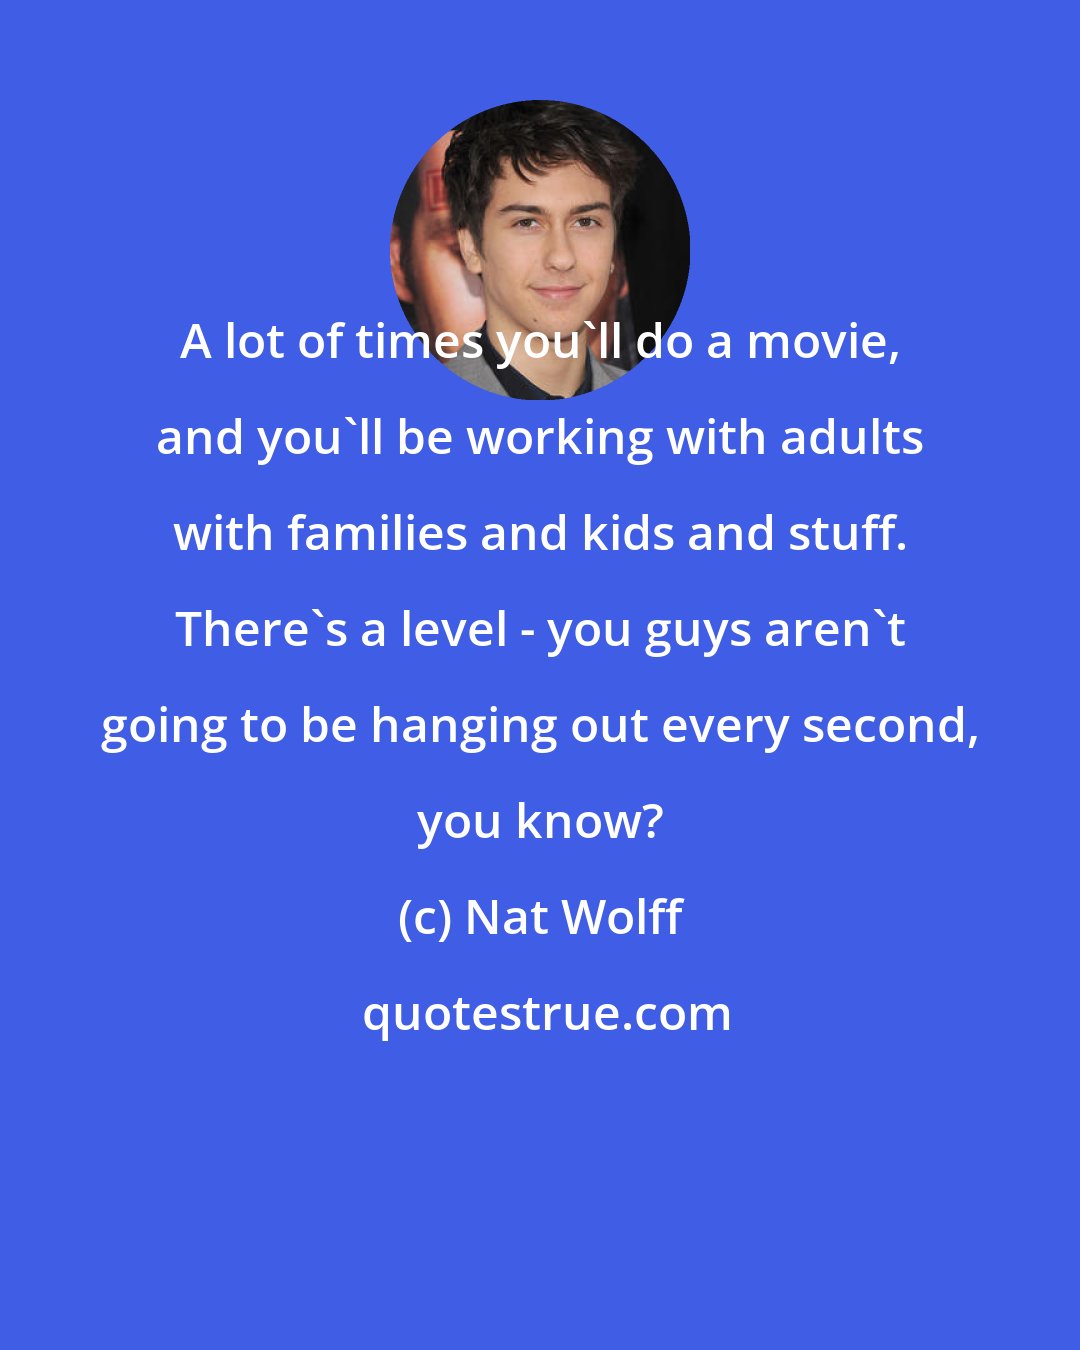 Nat Wolff: A lot of times you'll do a movie, and you'll be working with adults with families and kids and stuff. There's a level - you guys aren't going to be hanging out every second, you know?